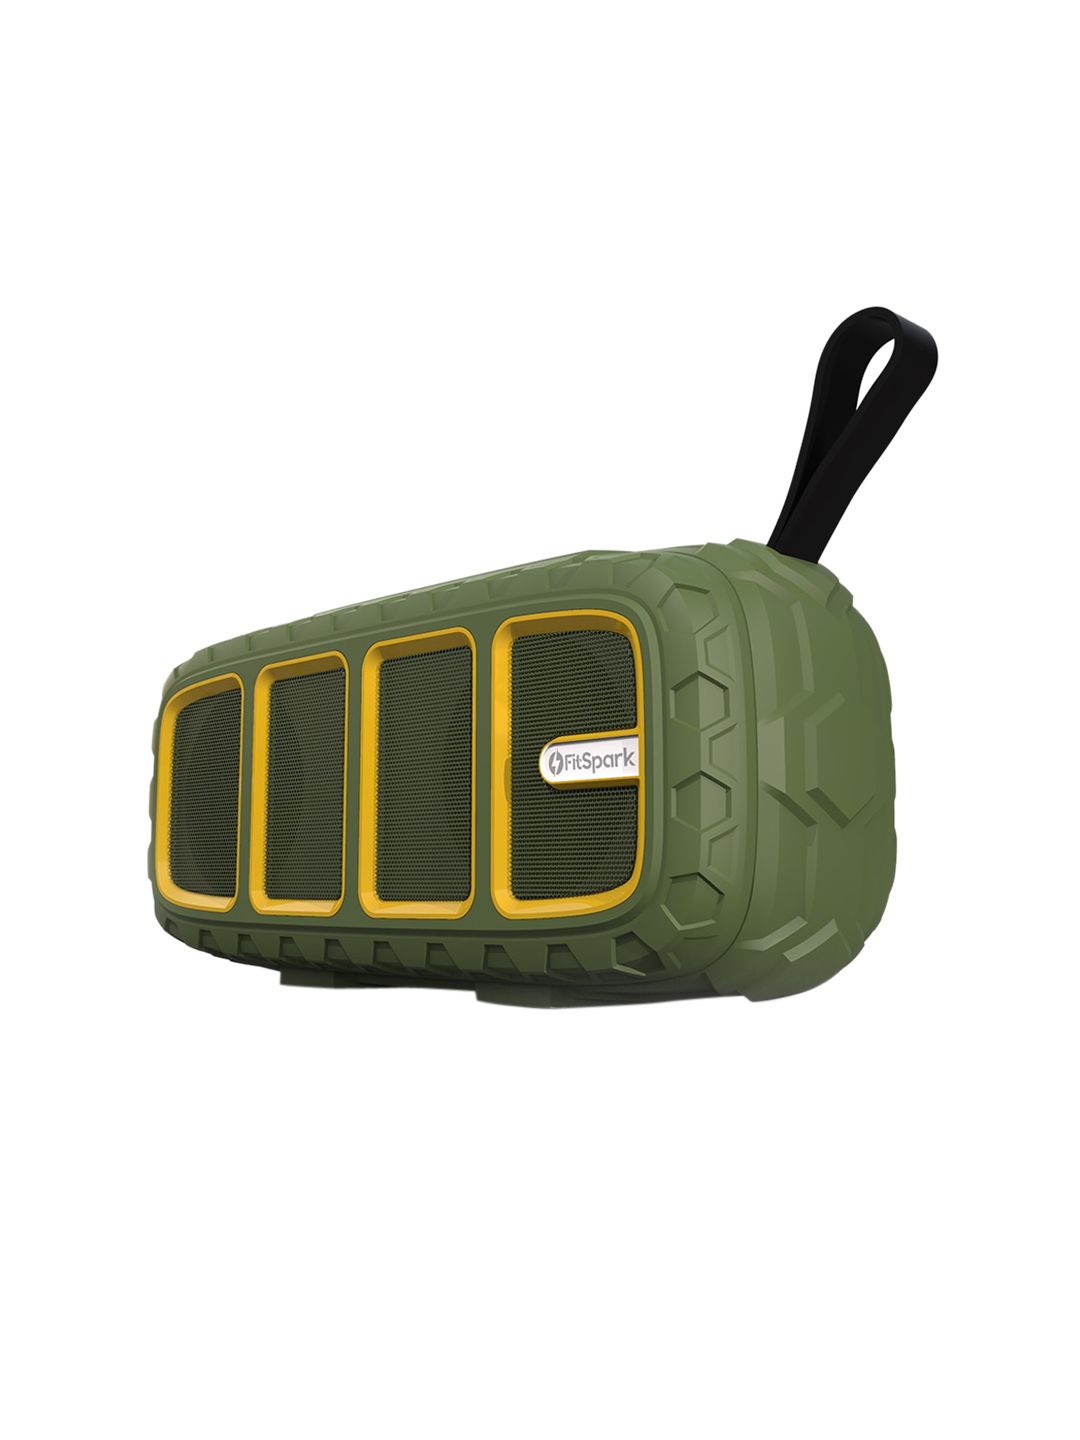 FitSpark Olive Green TAAL Portable Wireless Speaker with Dual Full Range Audio Drivers & Hands Free Calling Price in India